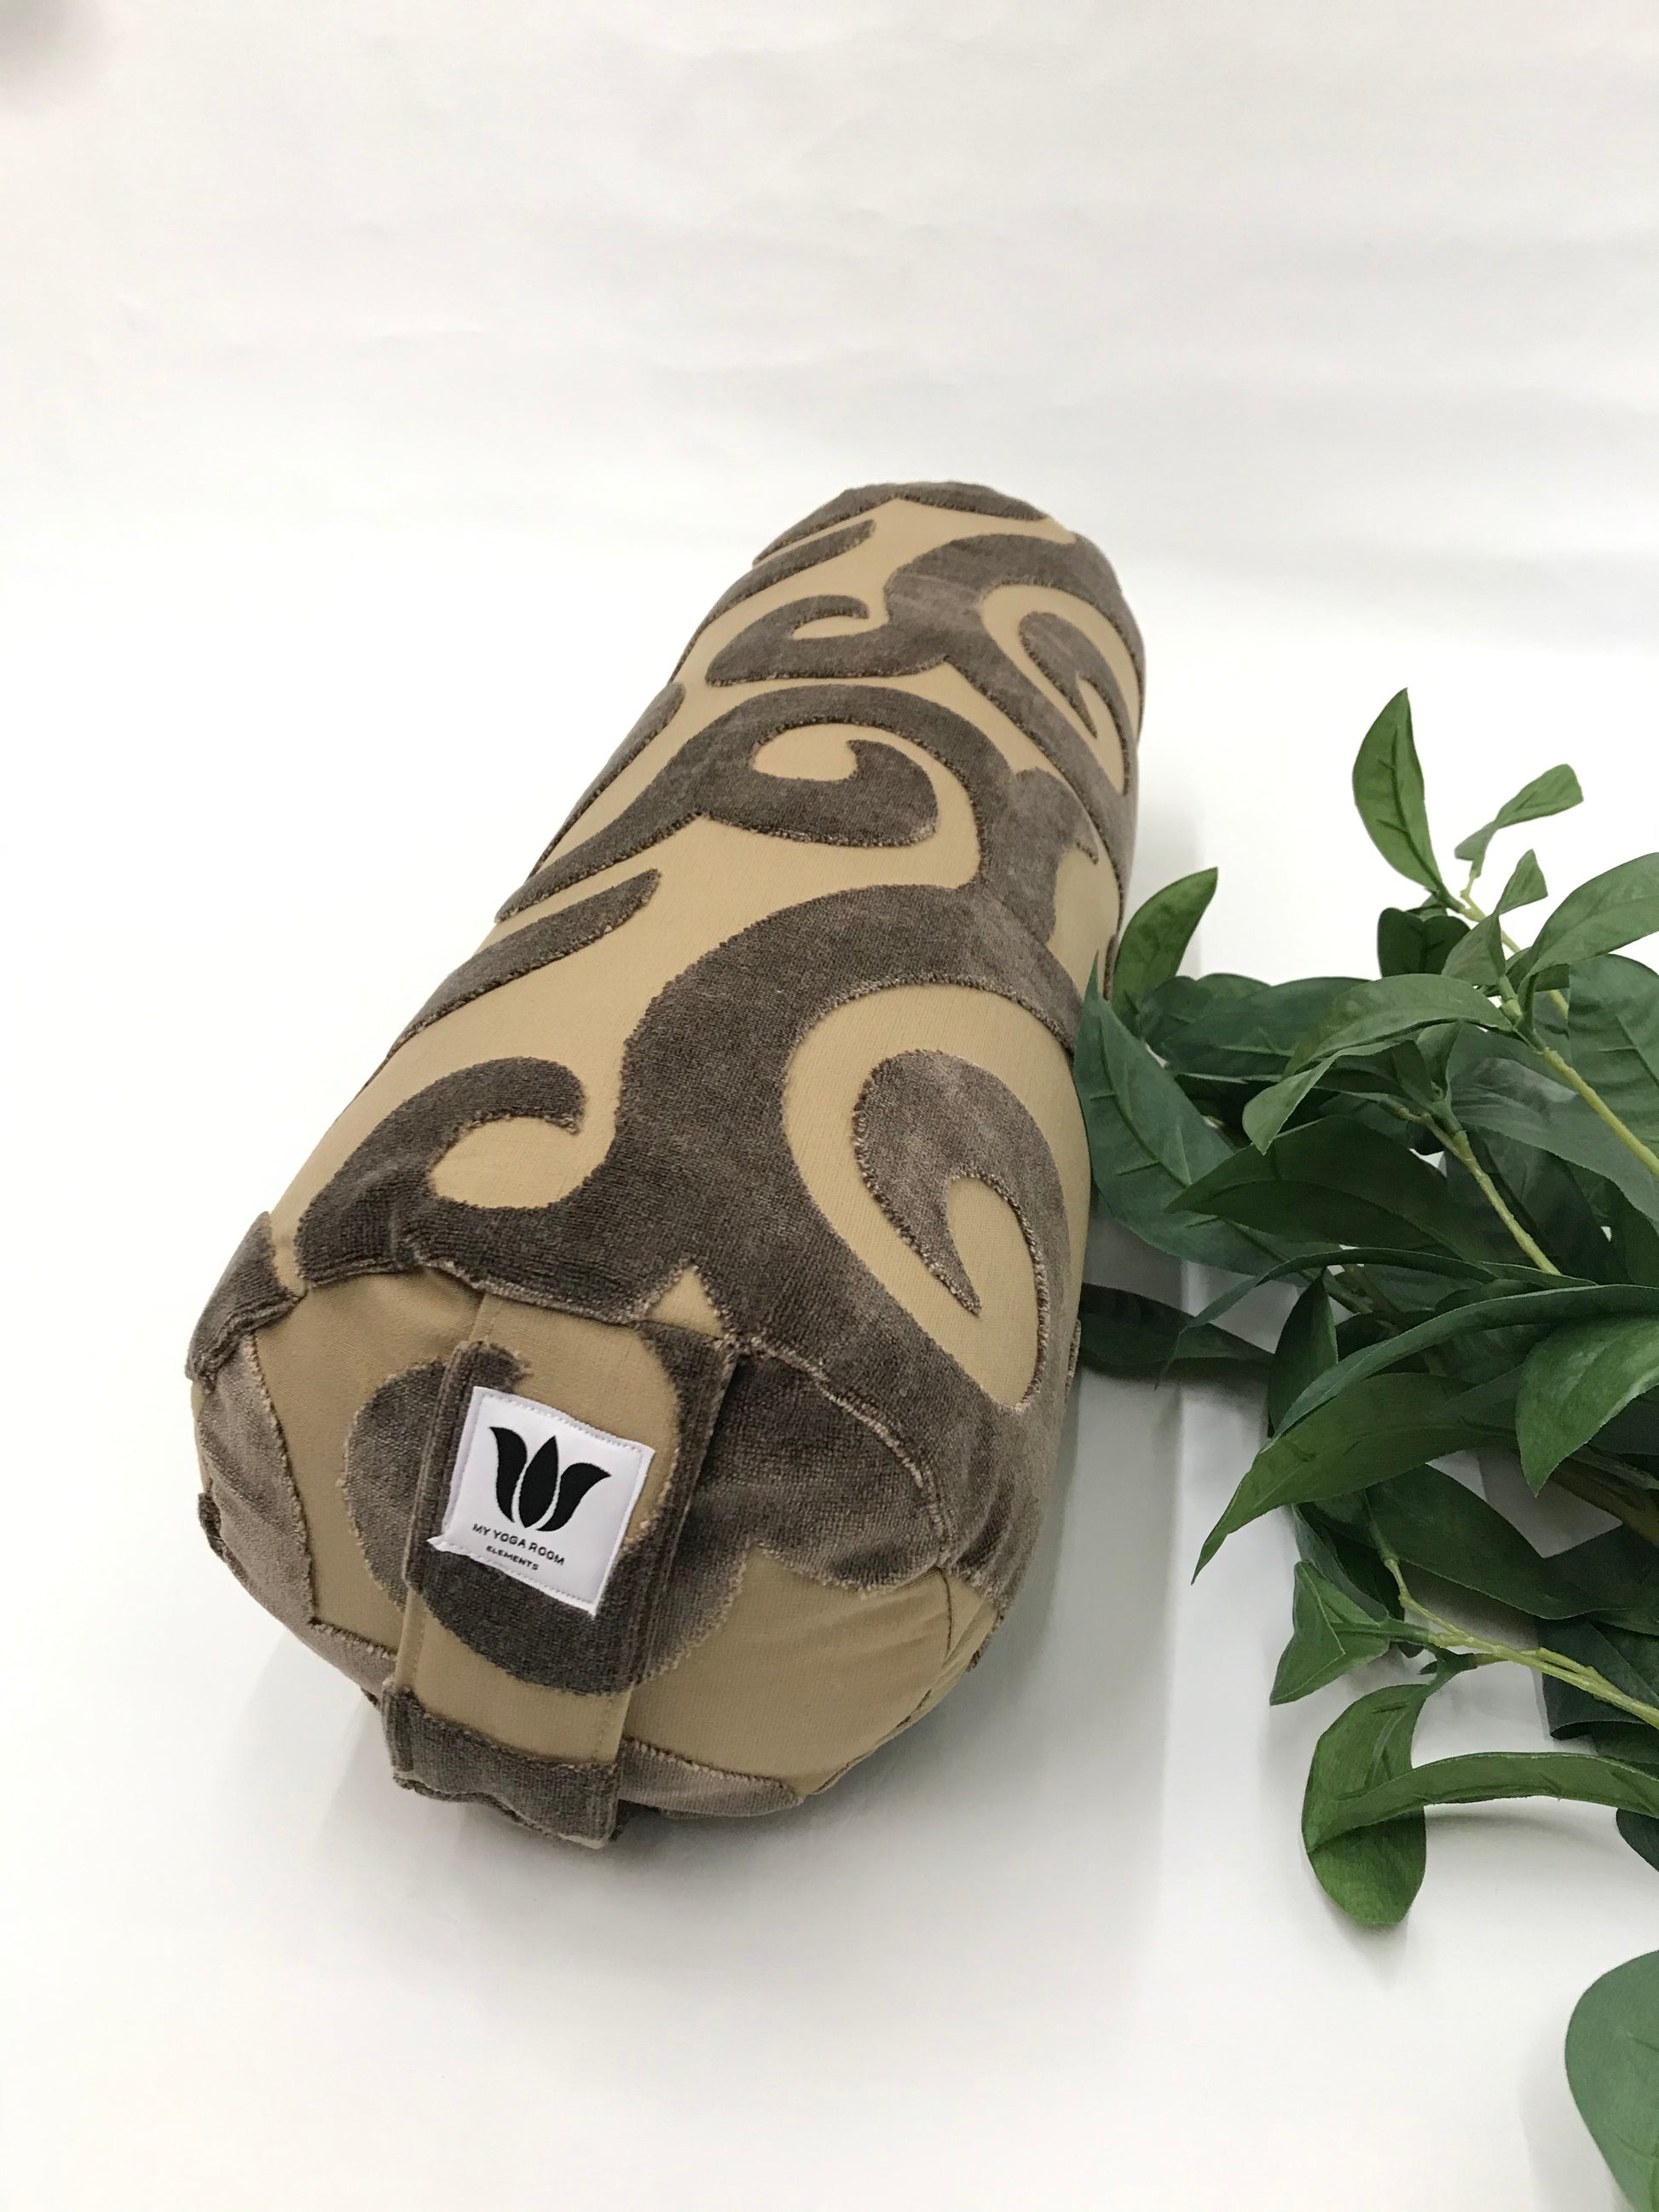 Round yoga bolster in plush brown cotton and linen swirl print fabric . Allergy conscious fill with removeable cover. Made in Canada by My Yoga Room Elements